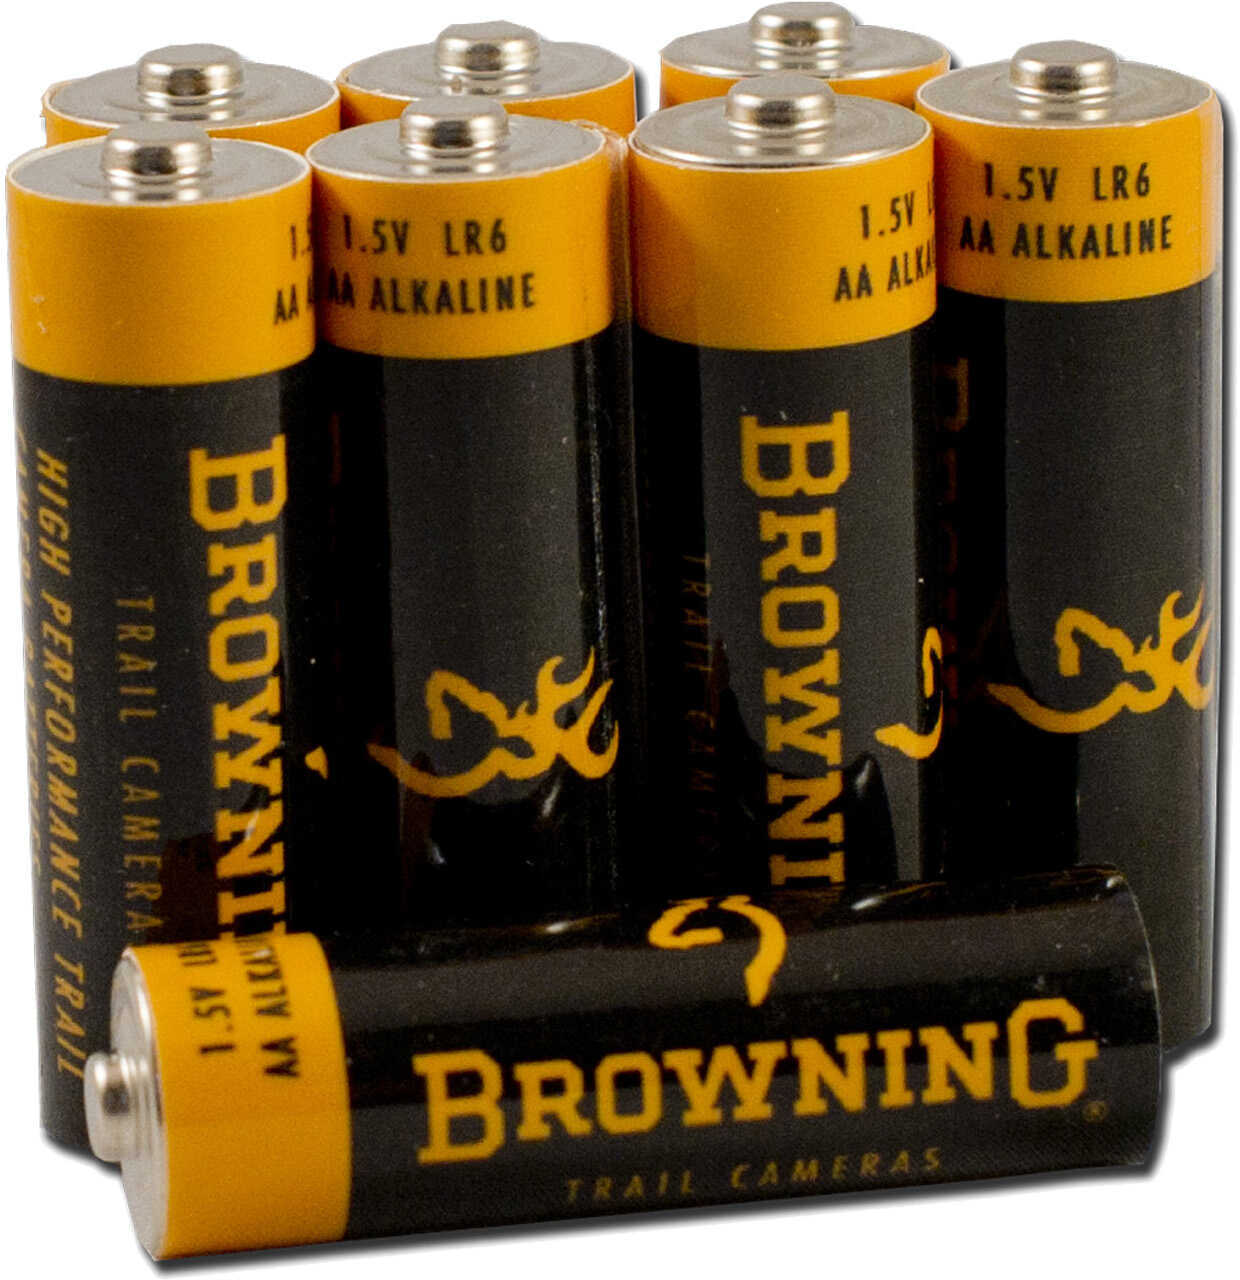 Browning Trail Camera AA Alkaline Battery Md: BTC-img-1